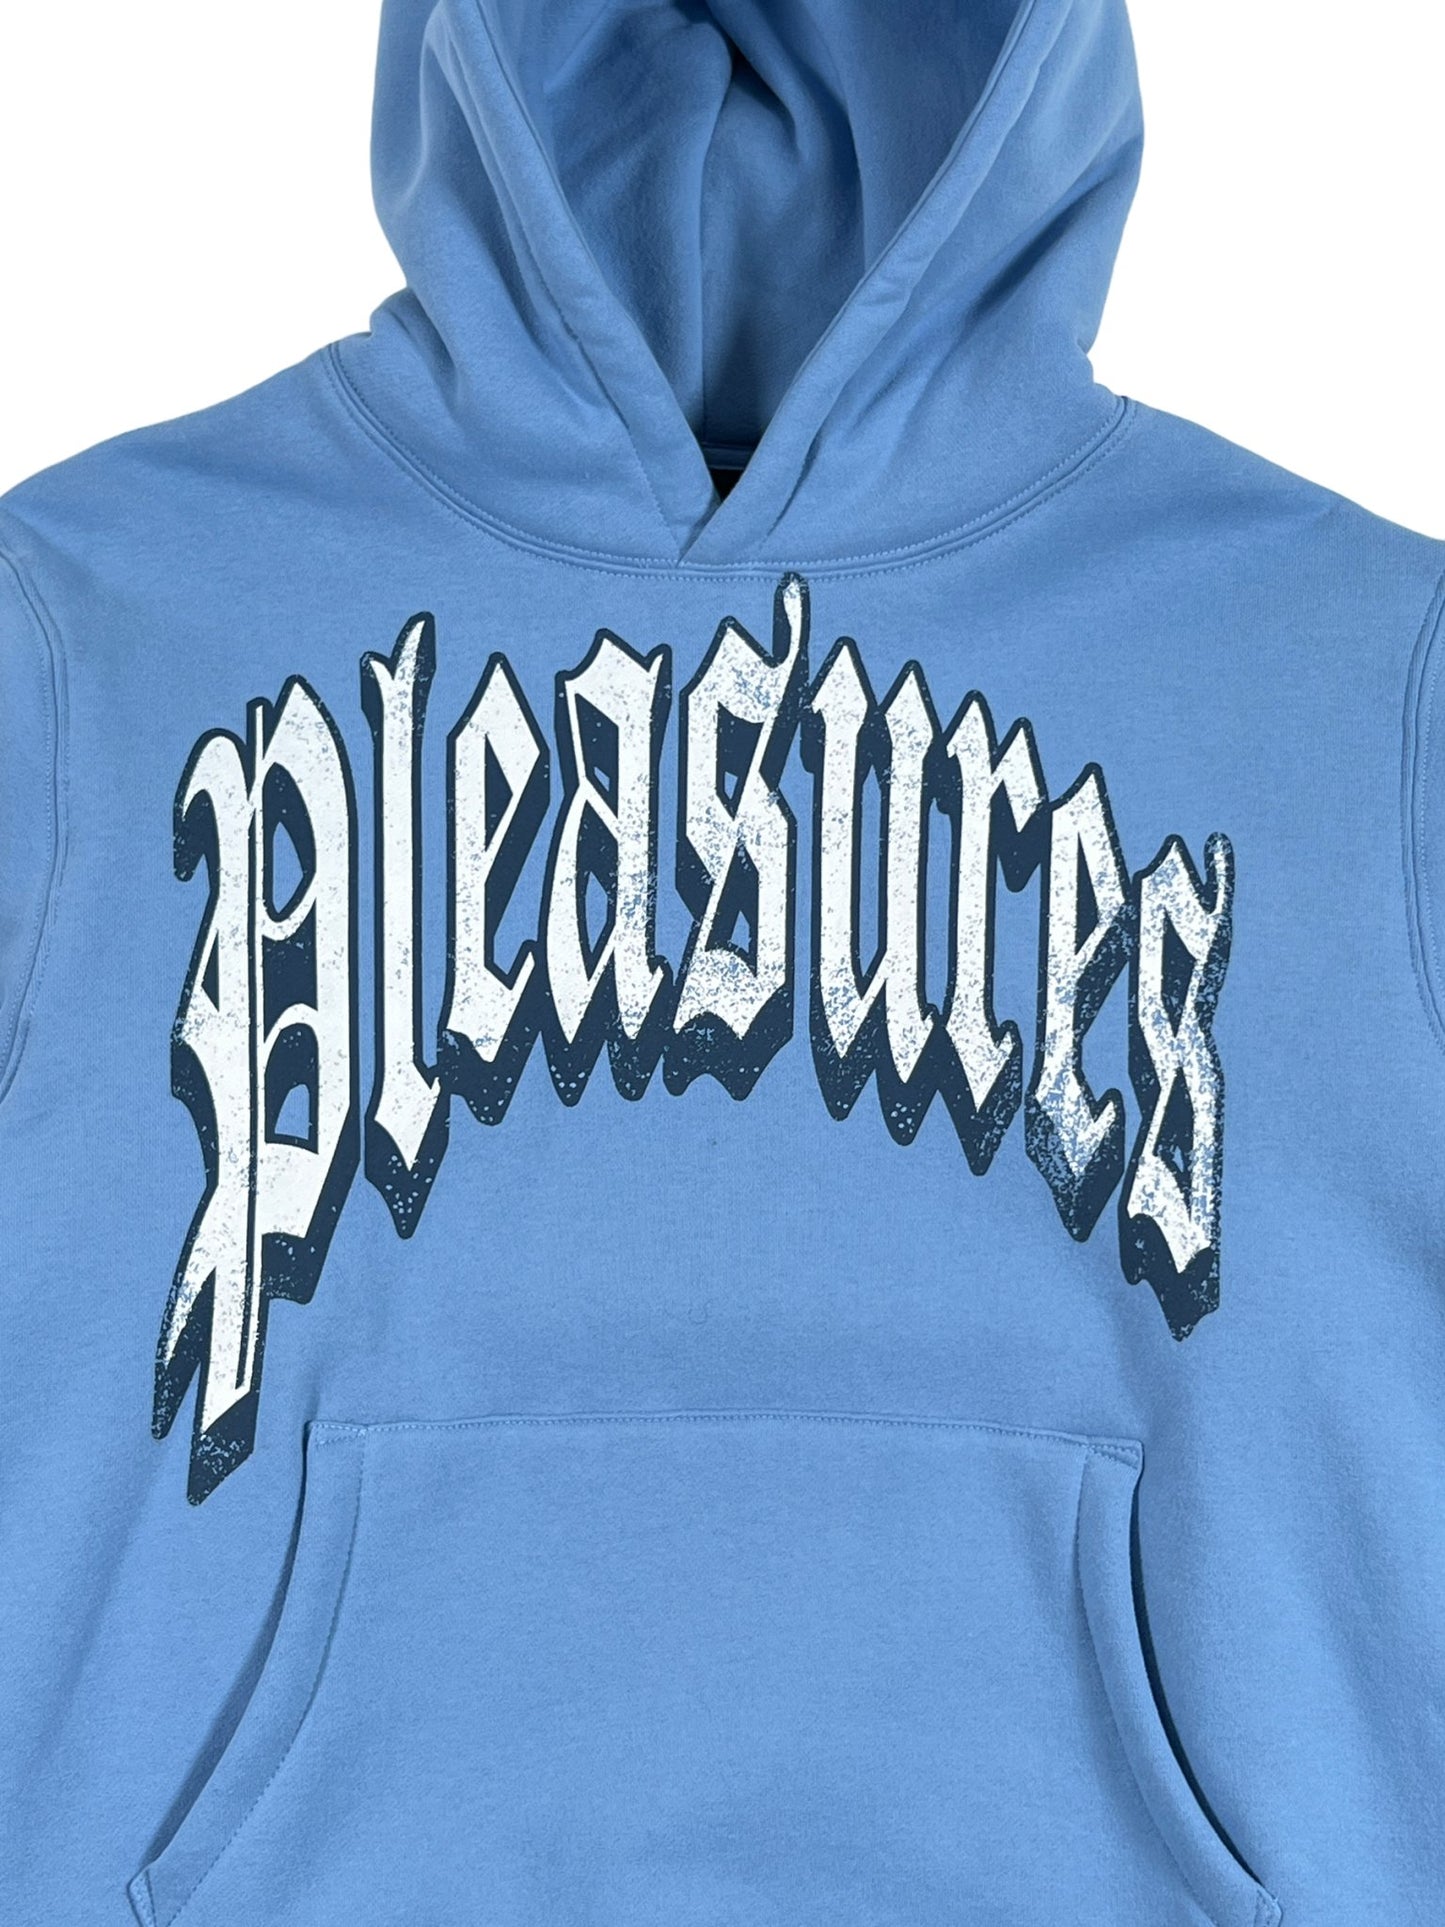 A vintage PLEASURES hoodie with the word "pleasures" on it, made from cotton.